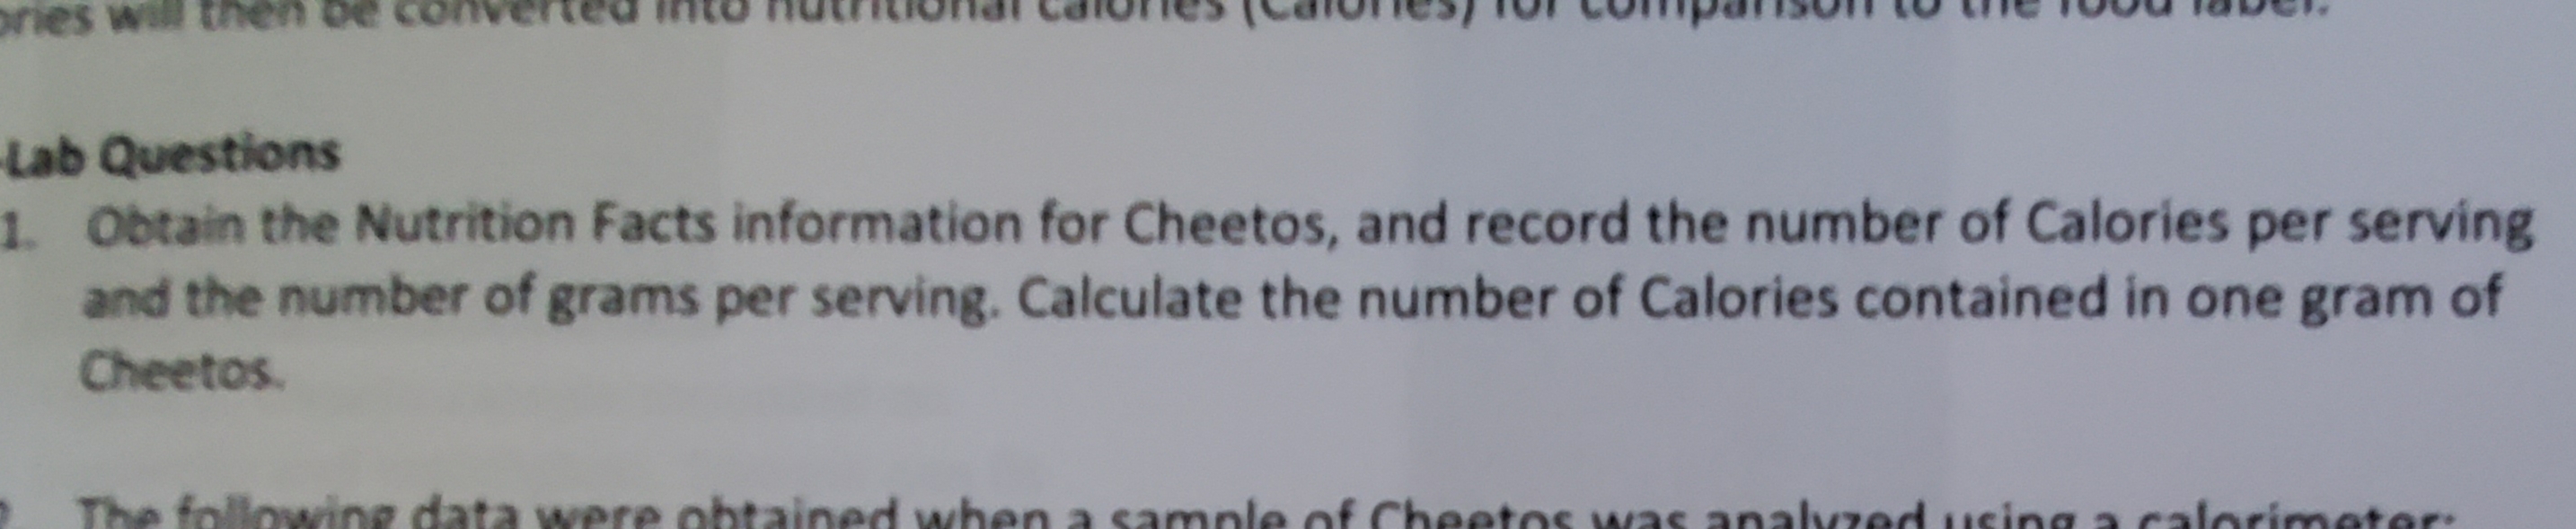 Lab Questions
1 Obtain the Nutrition Facts information for Cheetos, and record the number of Calories per serving
and the number of grams per serving. Calculate the number of Calories contained in one gram of
Cheetos.
lowing data were obtained when a sample of Cheetos was analvzed.using a.calorimeter:
The
